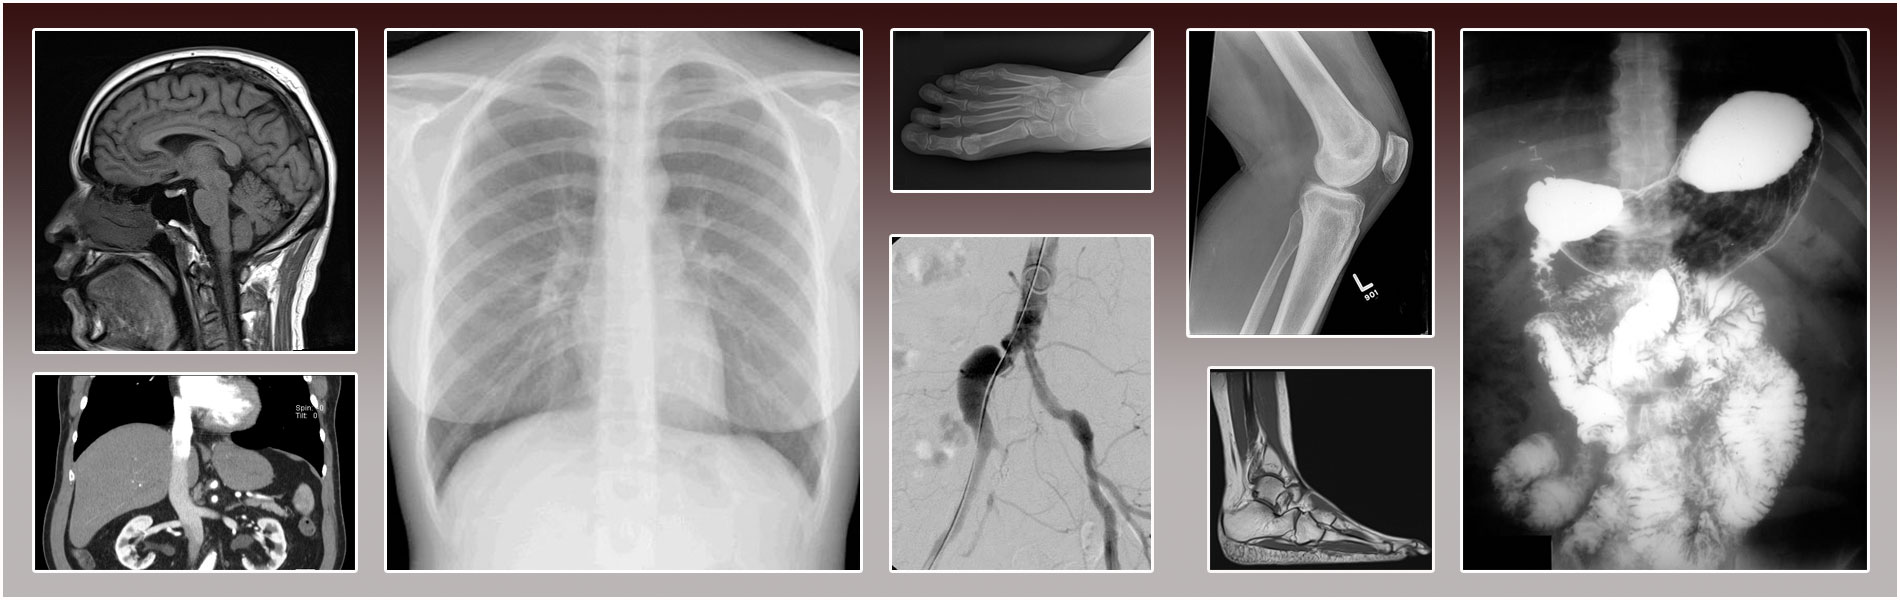 Collage of radiographic images